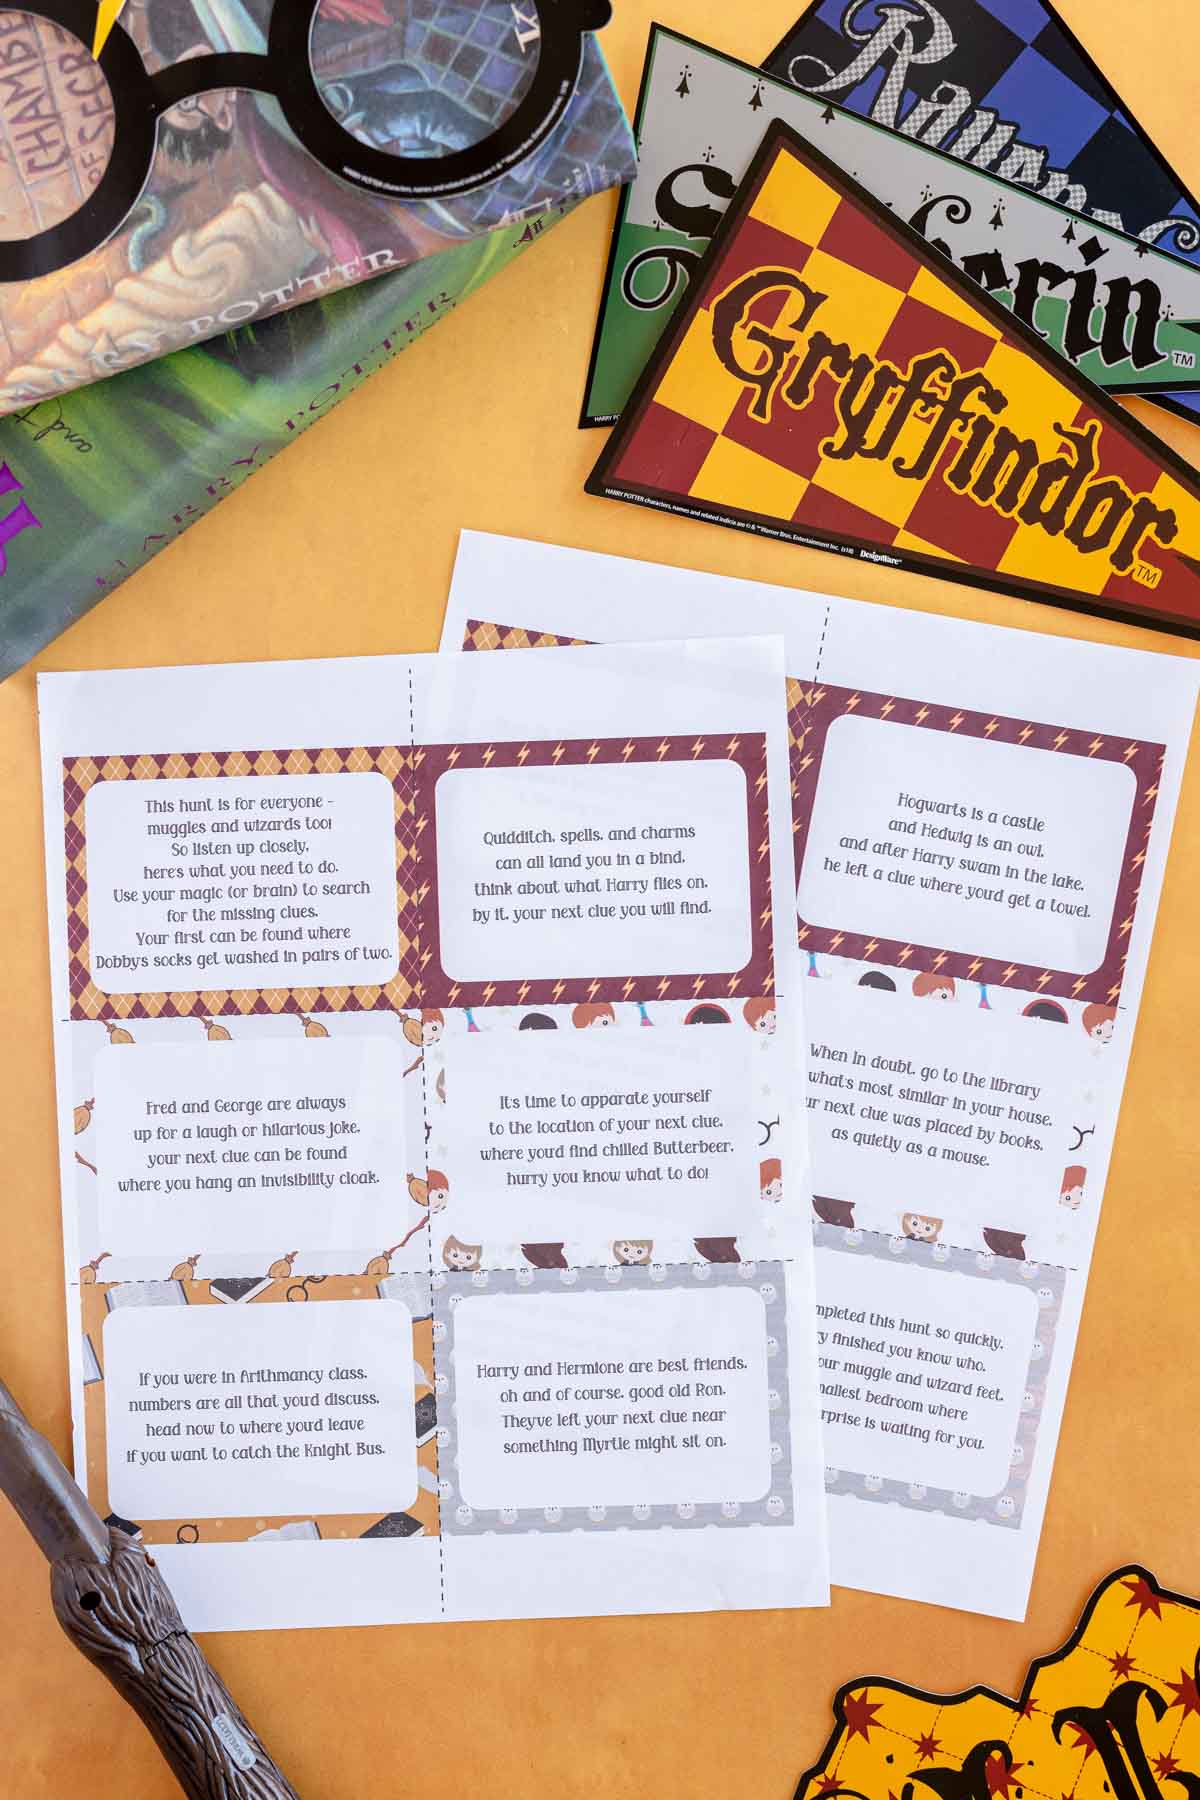 printed out Harry Potter scavenger hunt clues